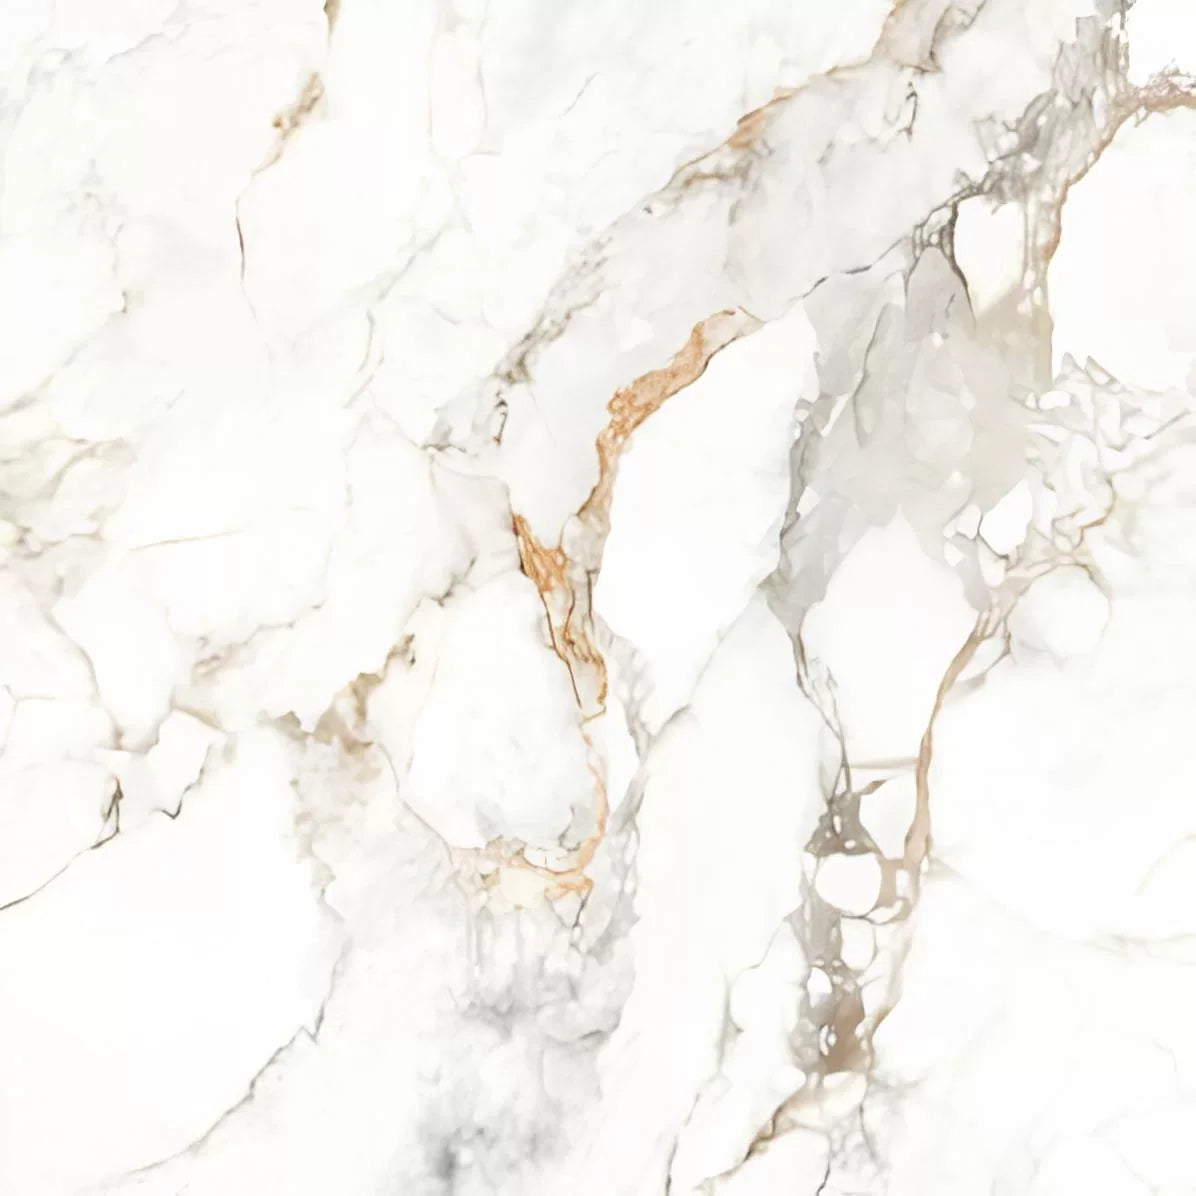 Gold Dust Extra Large Polished Marble Wall And Floor Porcelain Tiles 100cm x 100cm